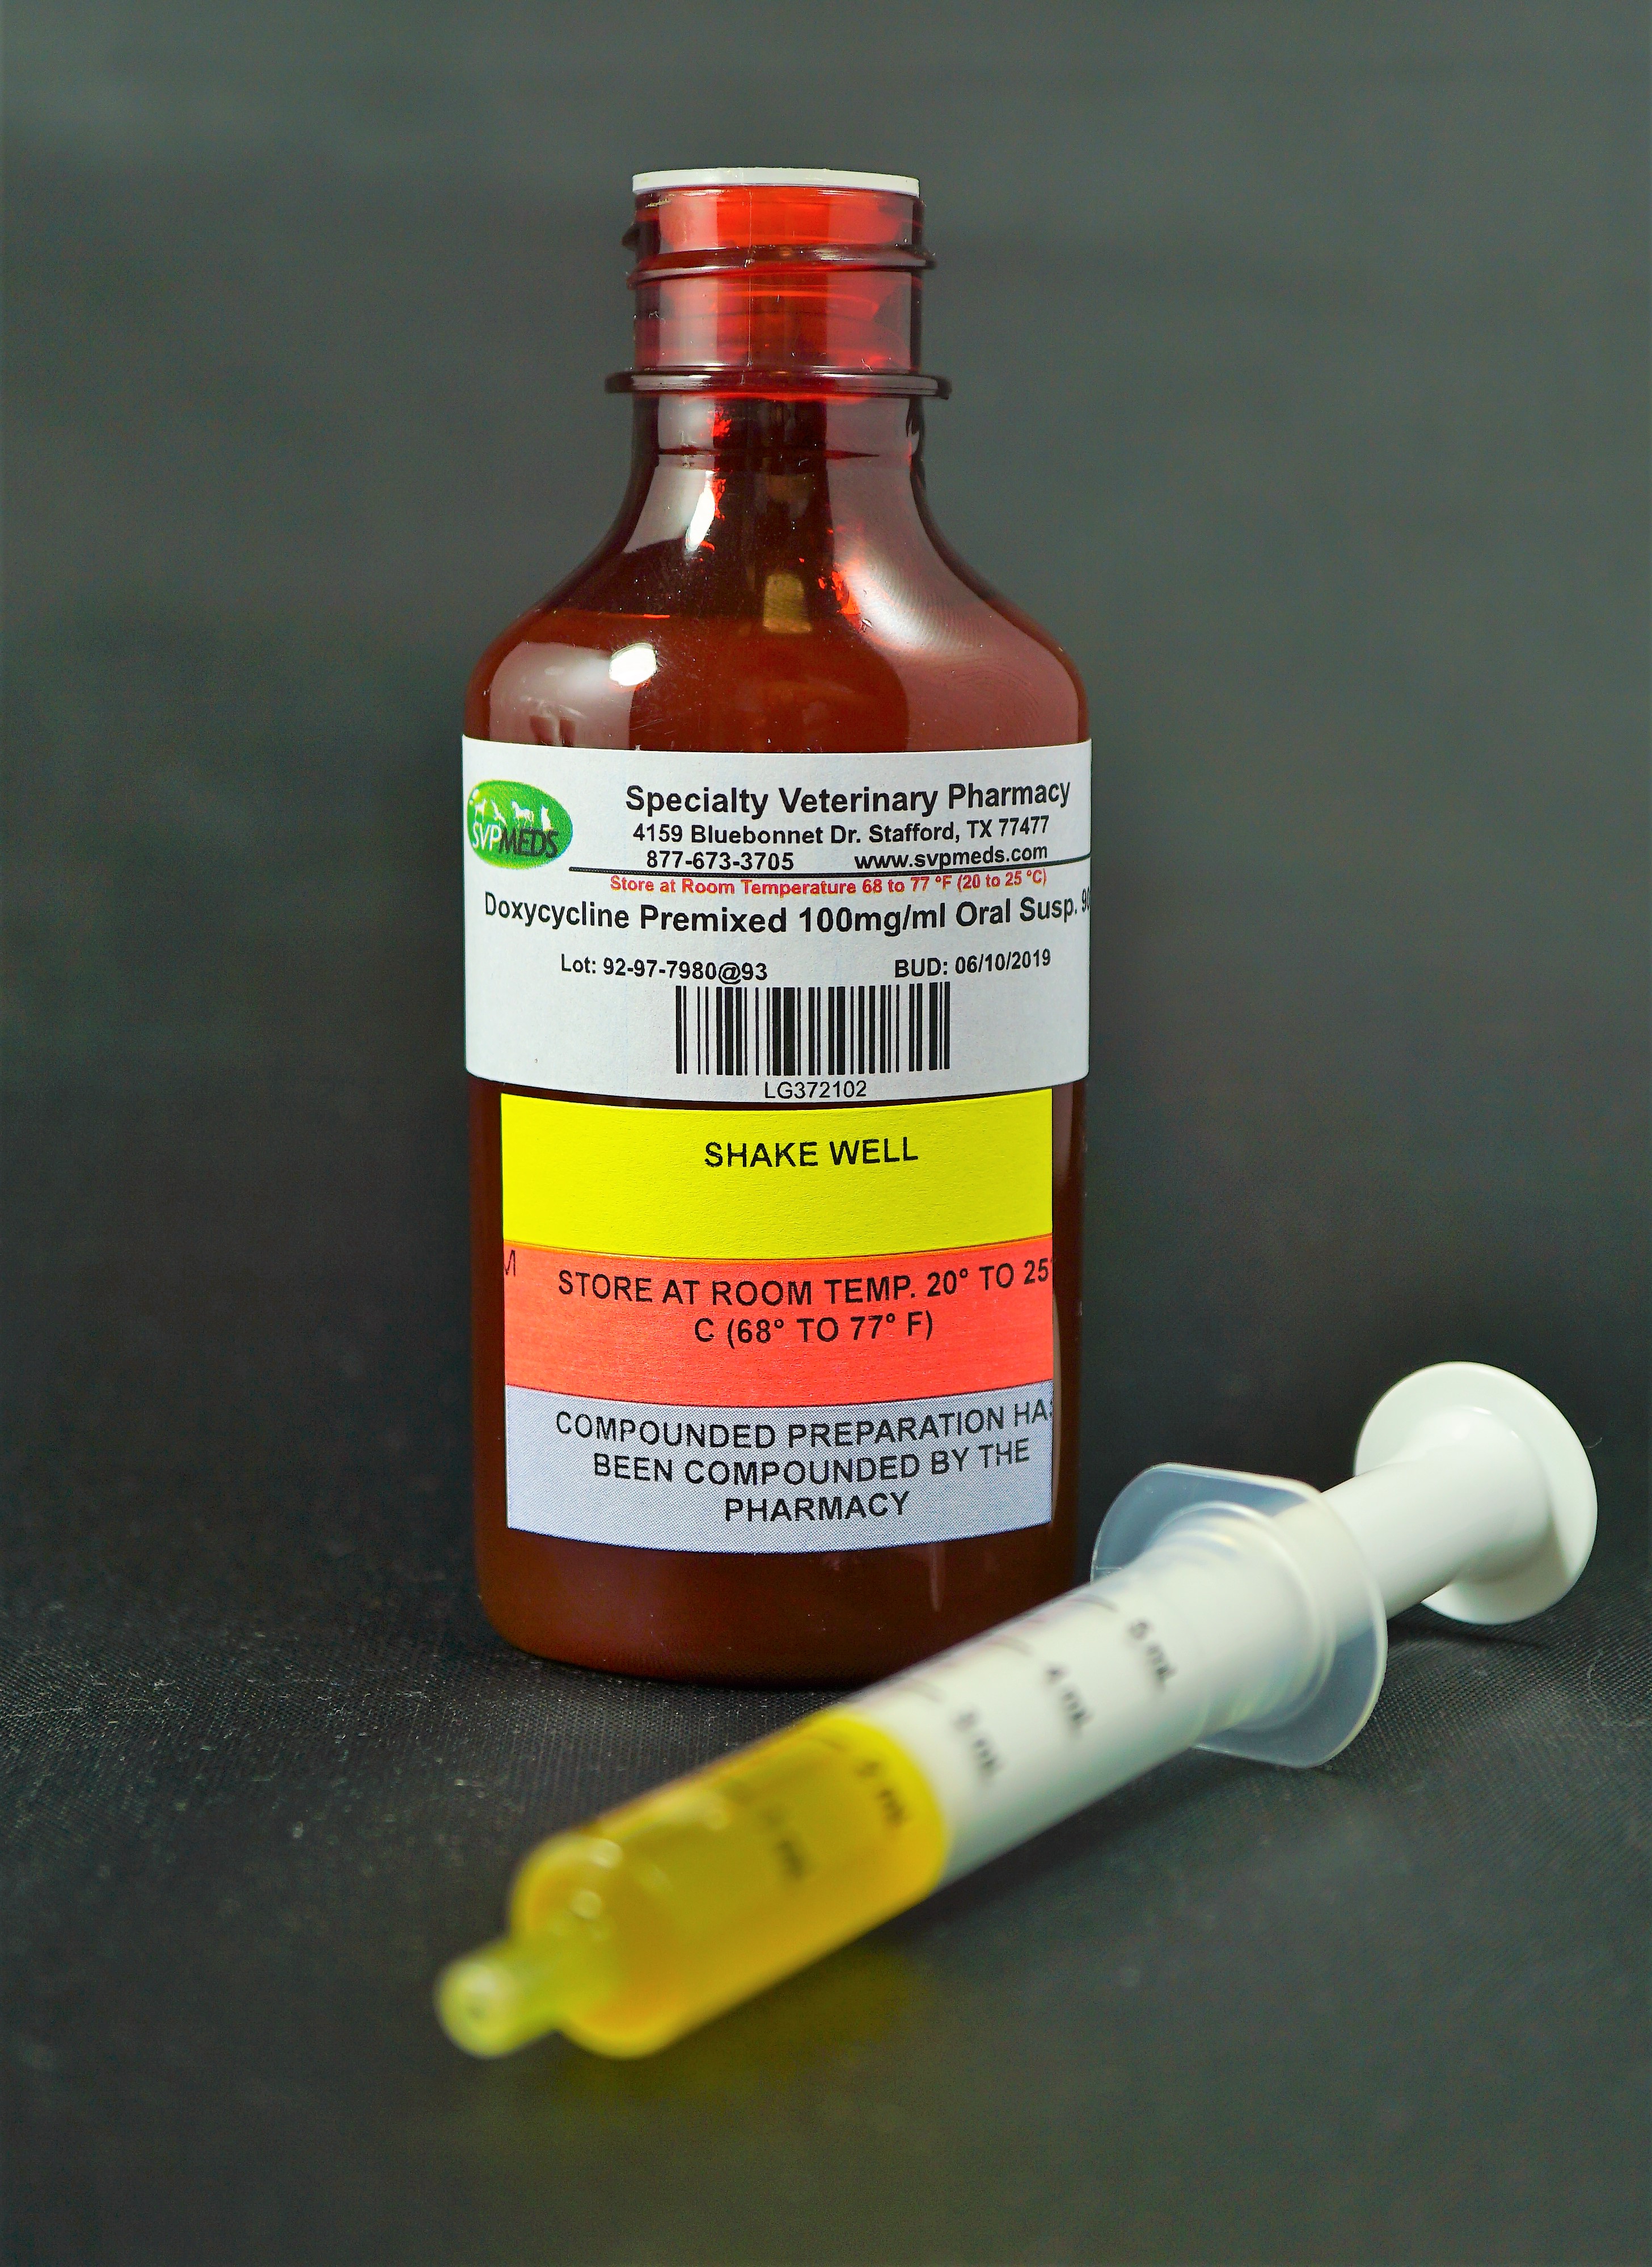 Doxycycline PREMIXED Oral Liquid compounded for dogs and cats.